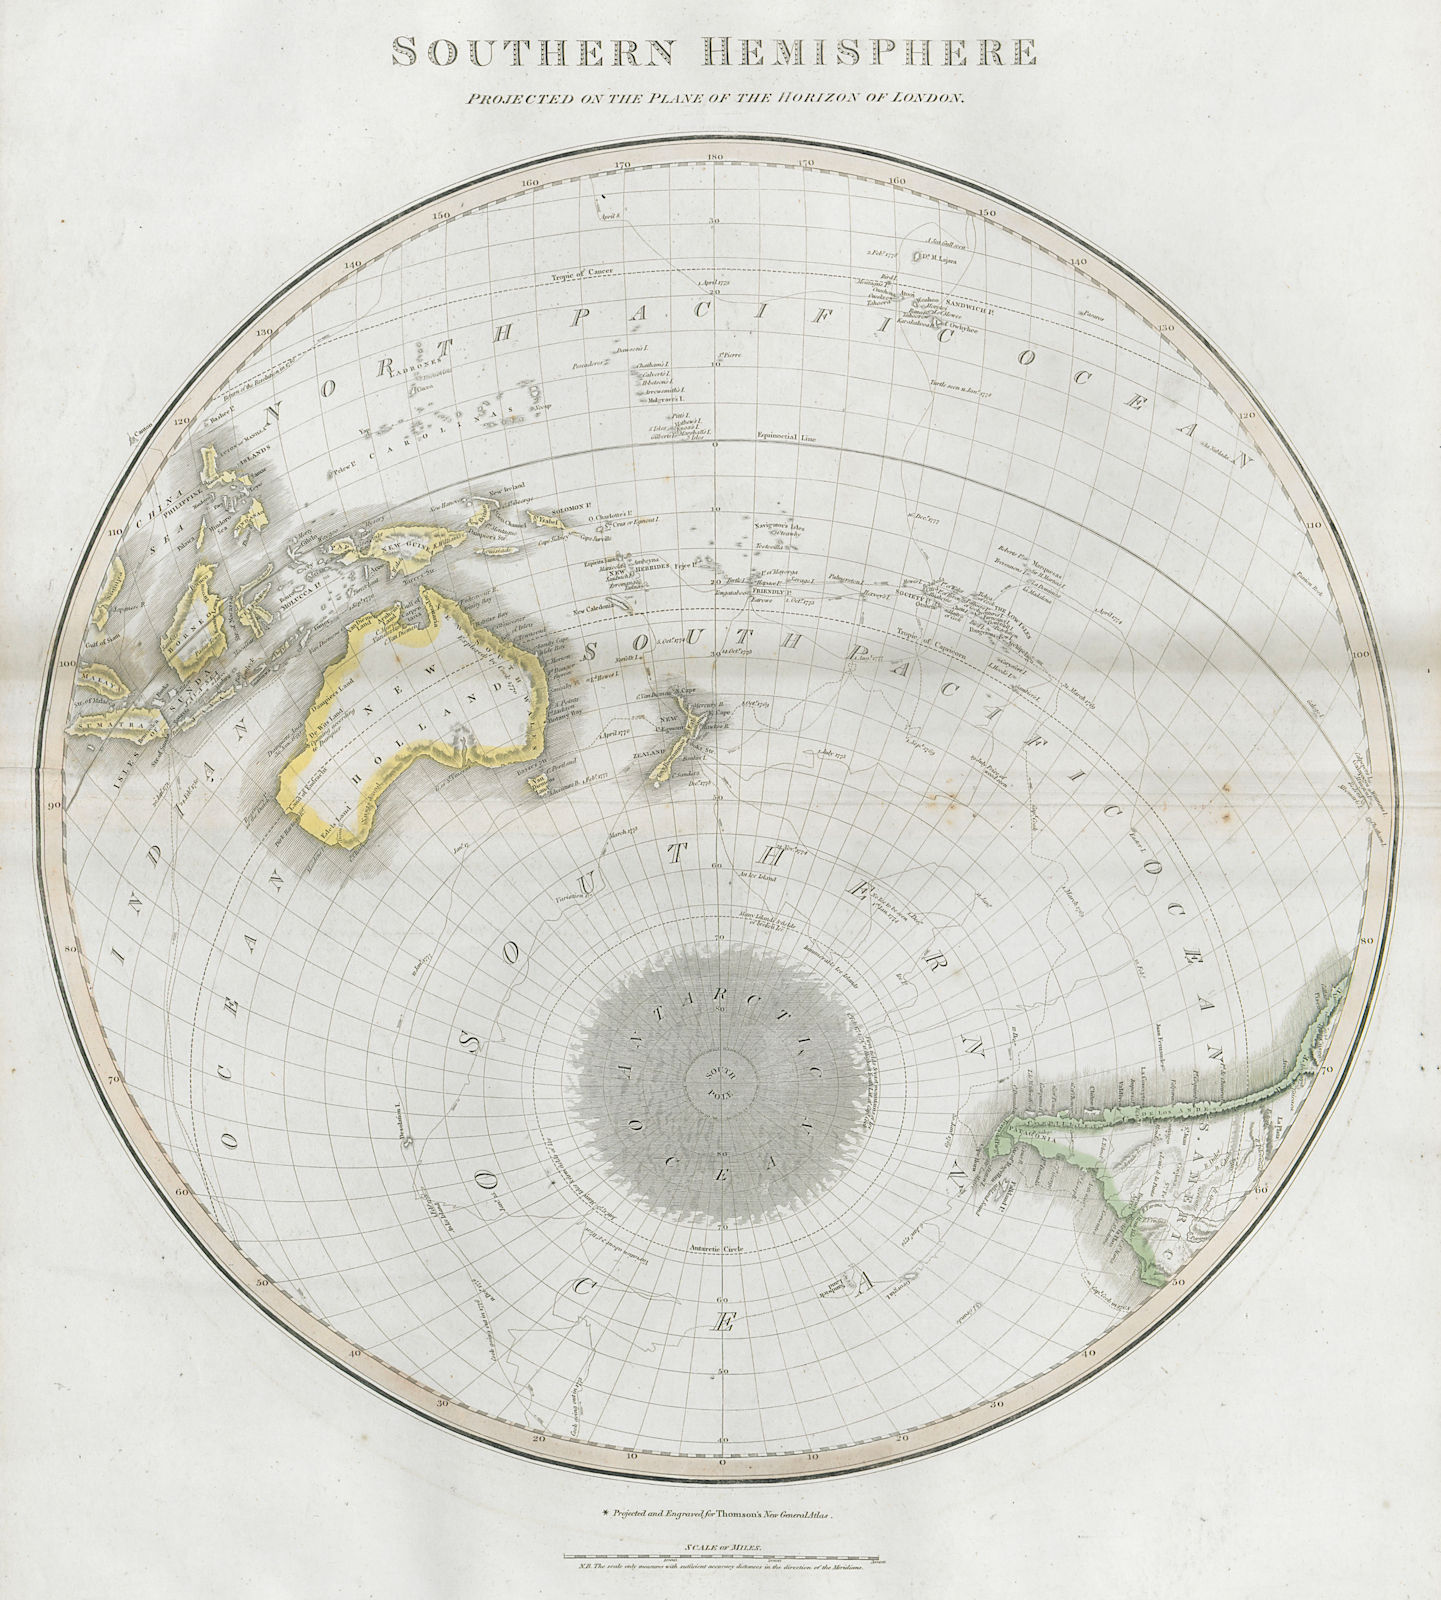 "Southern hemisphere… on the plane of the horizon of London". THOMSON 1830 map